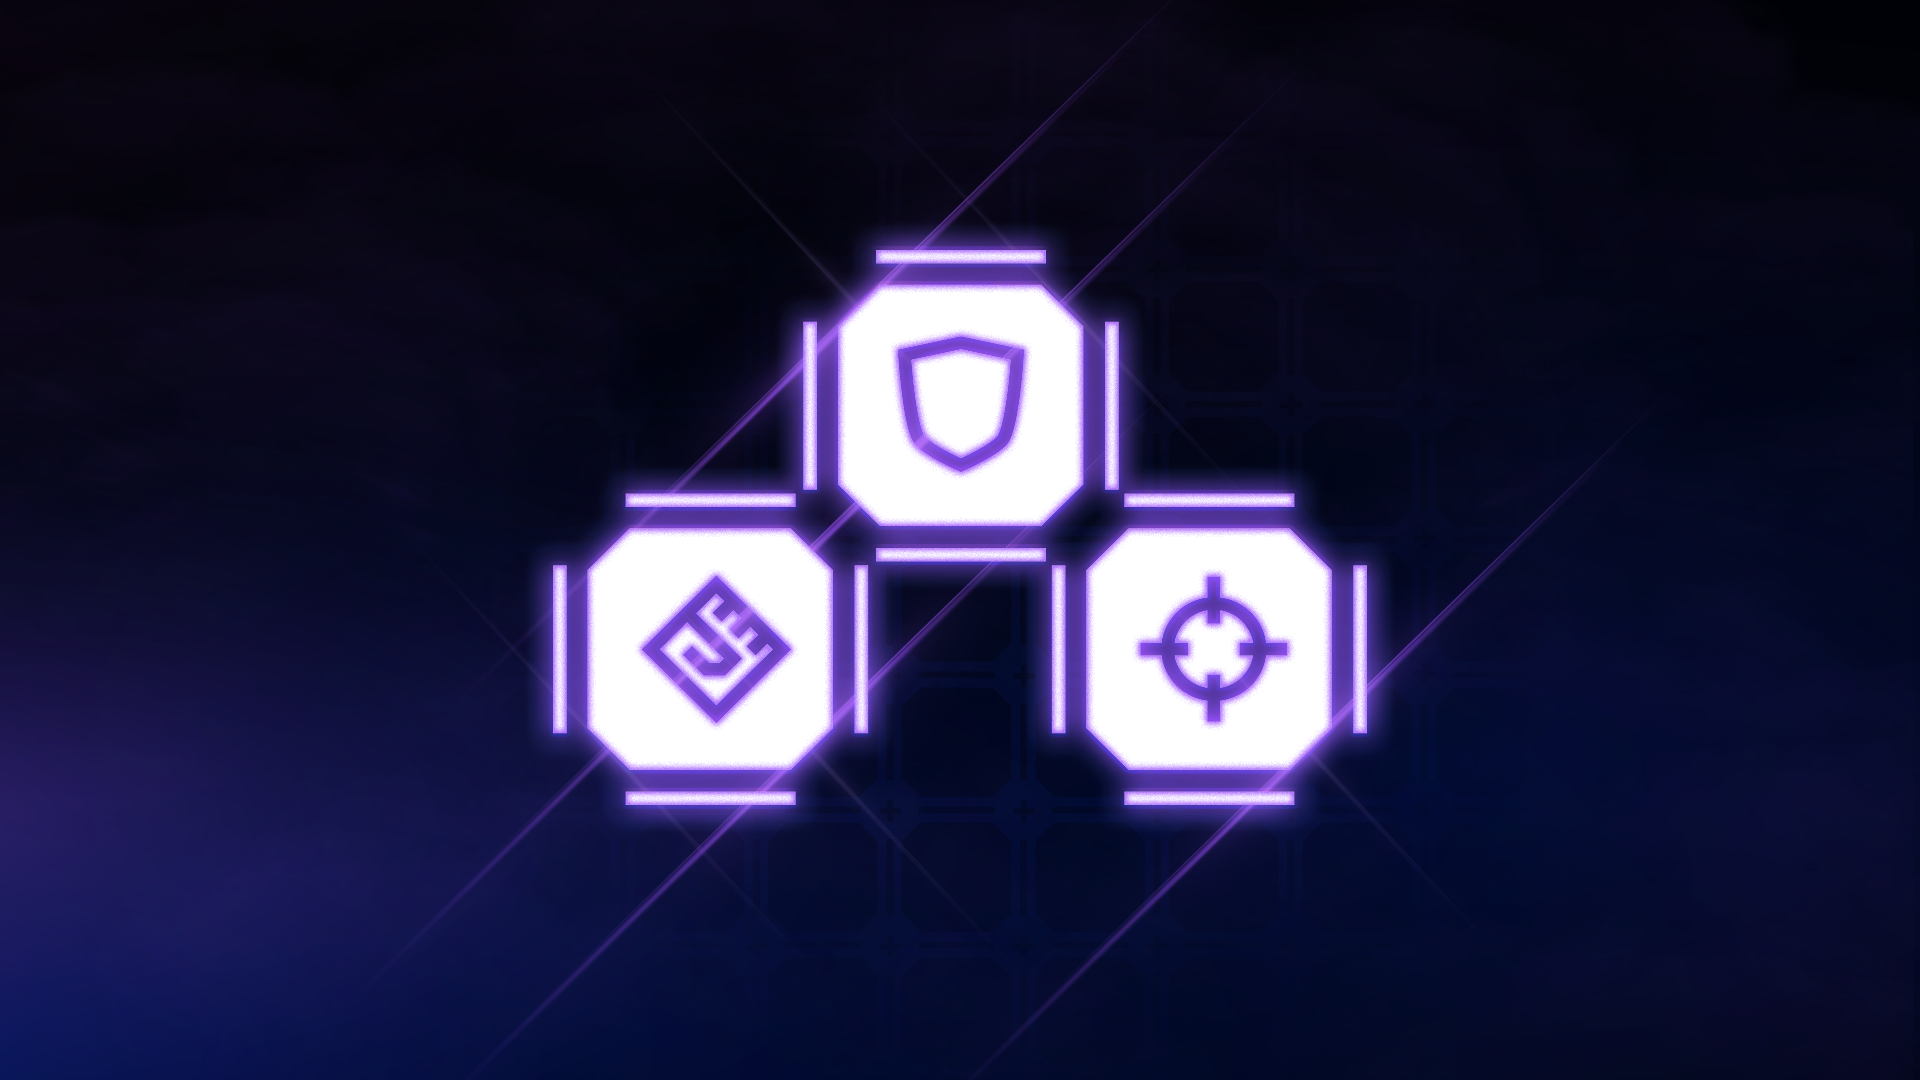 Icon for Fusion Expert